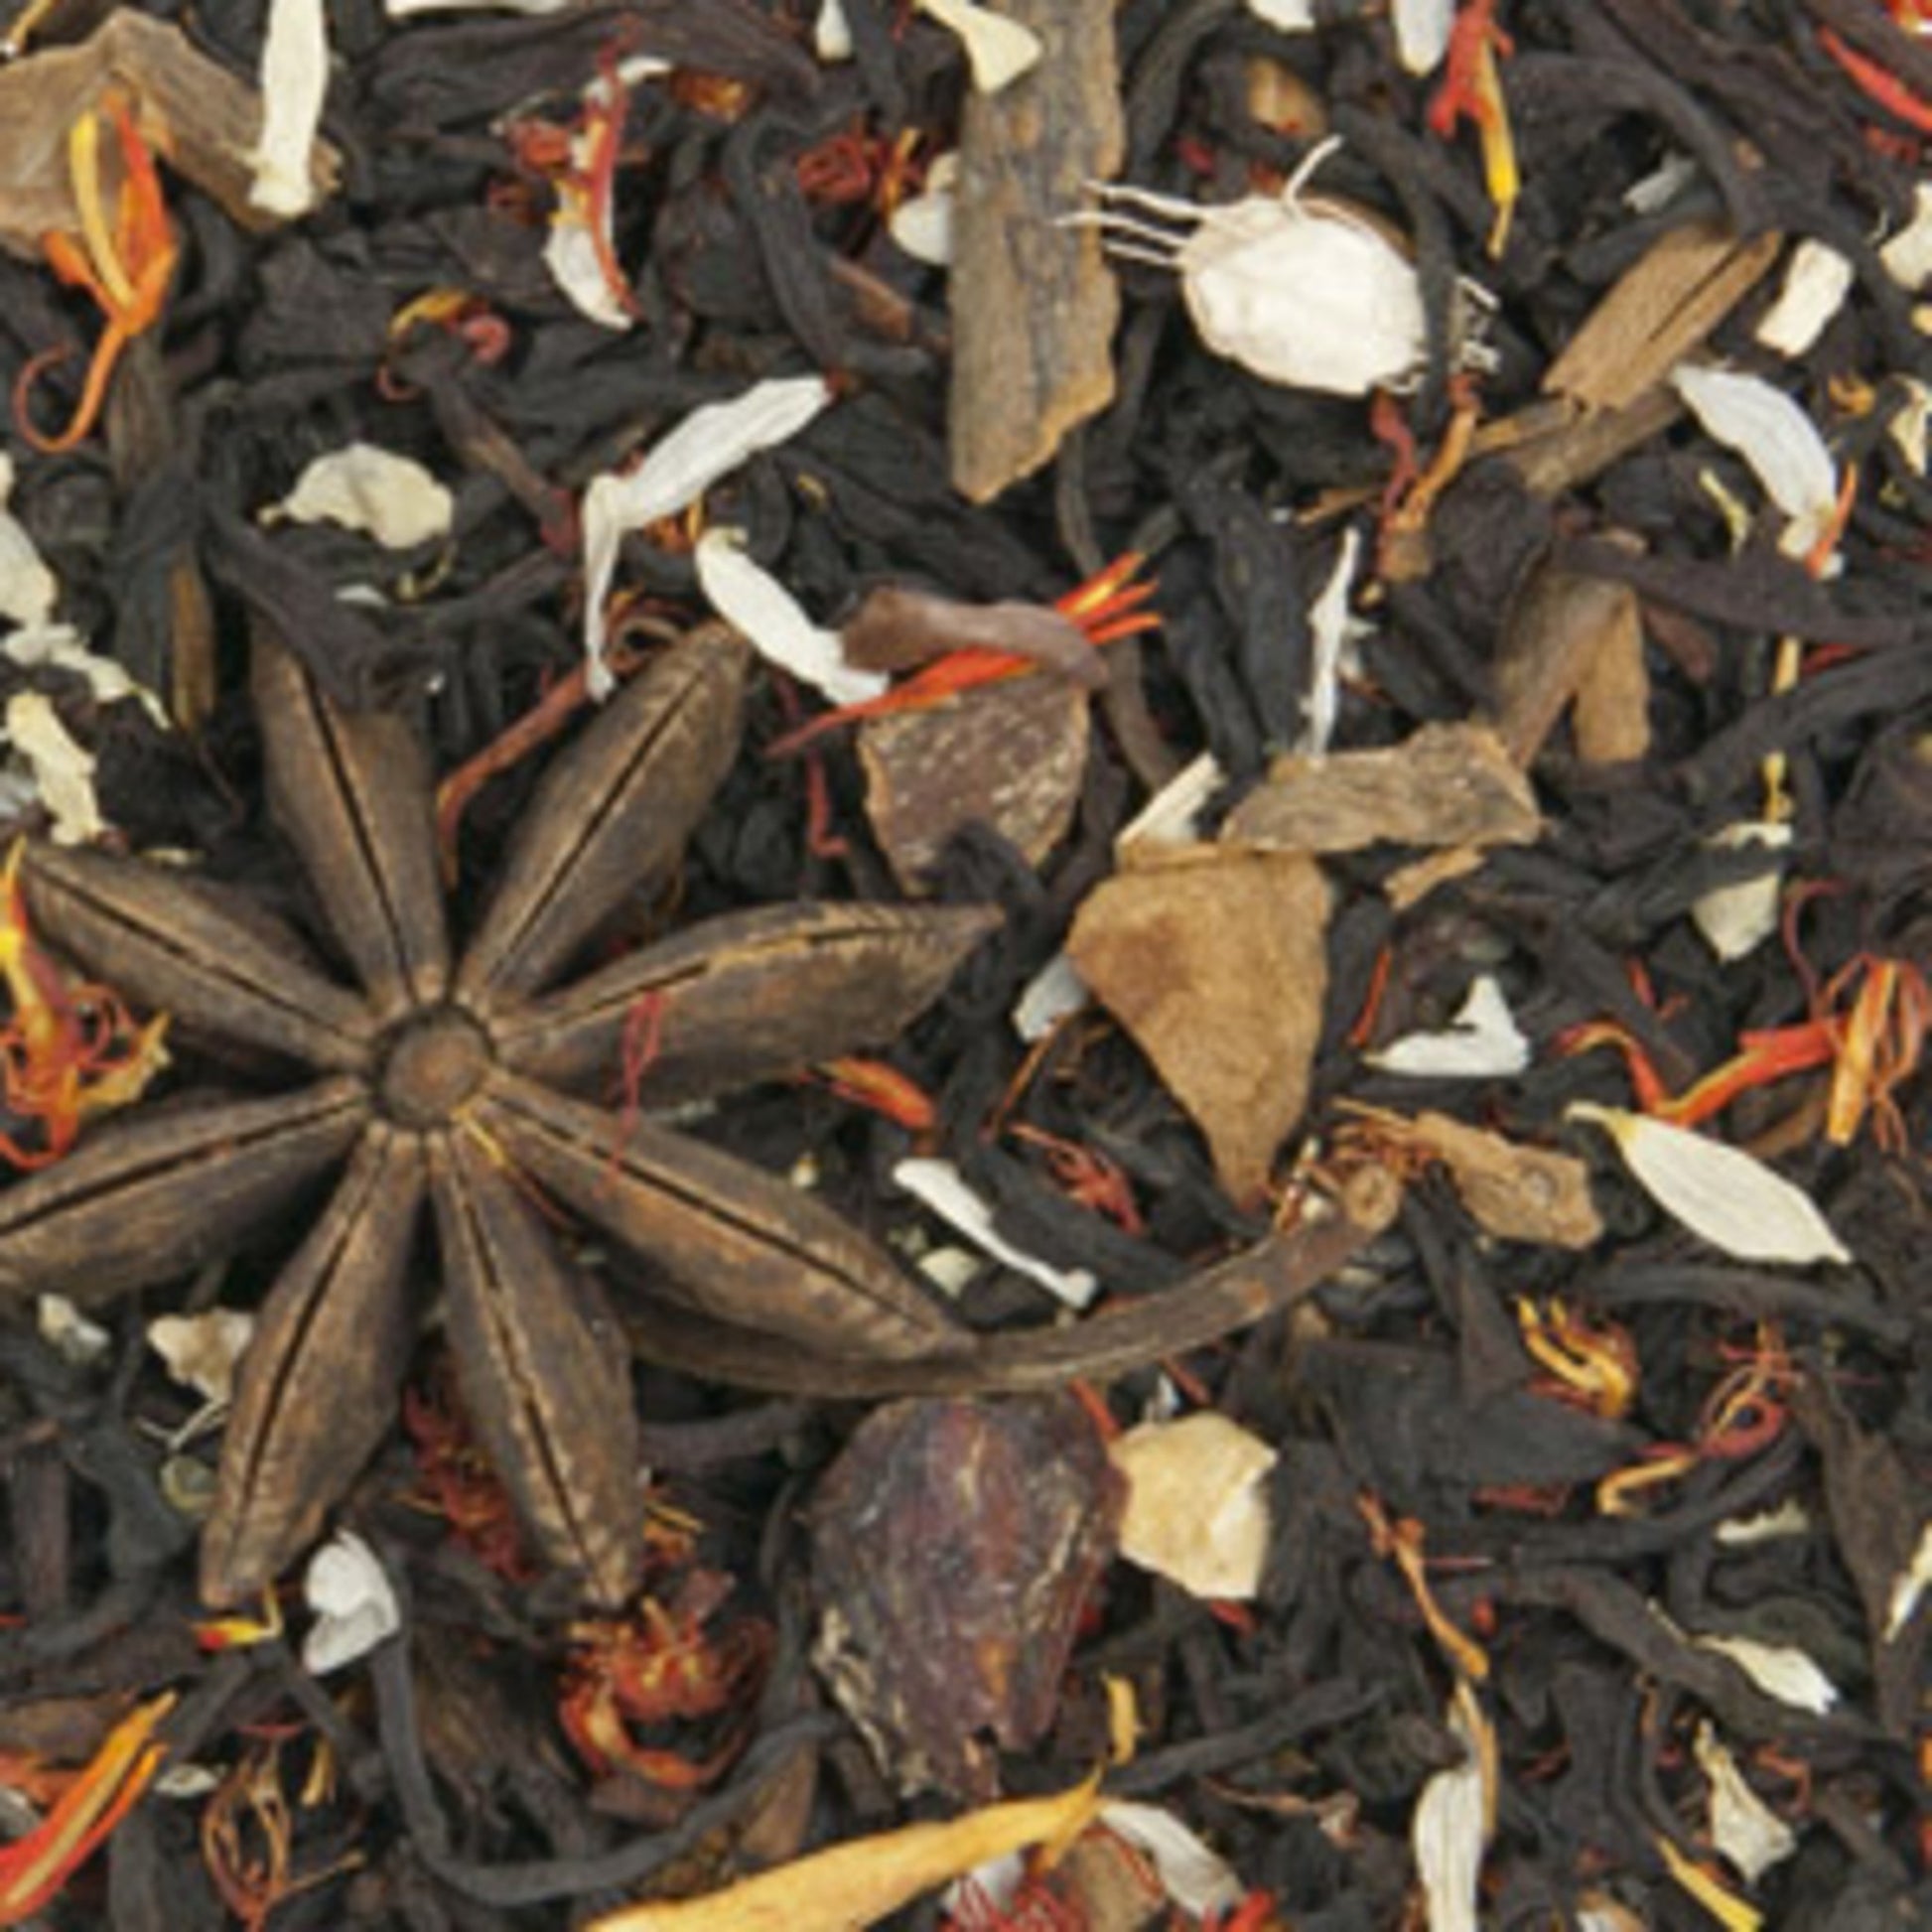 German Gingerbread Holiday Specialty Loose Leaf Blend Tea & Infusions The Grateful Tea Co. 